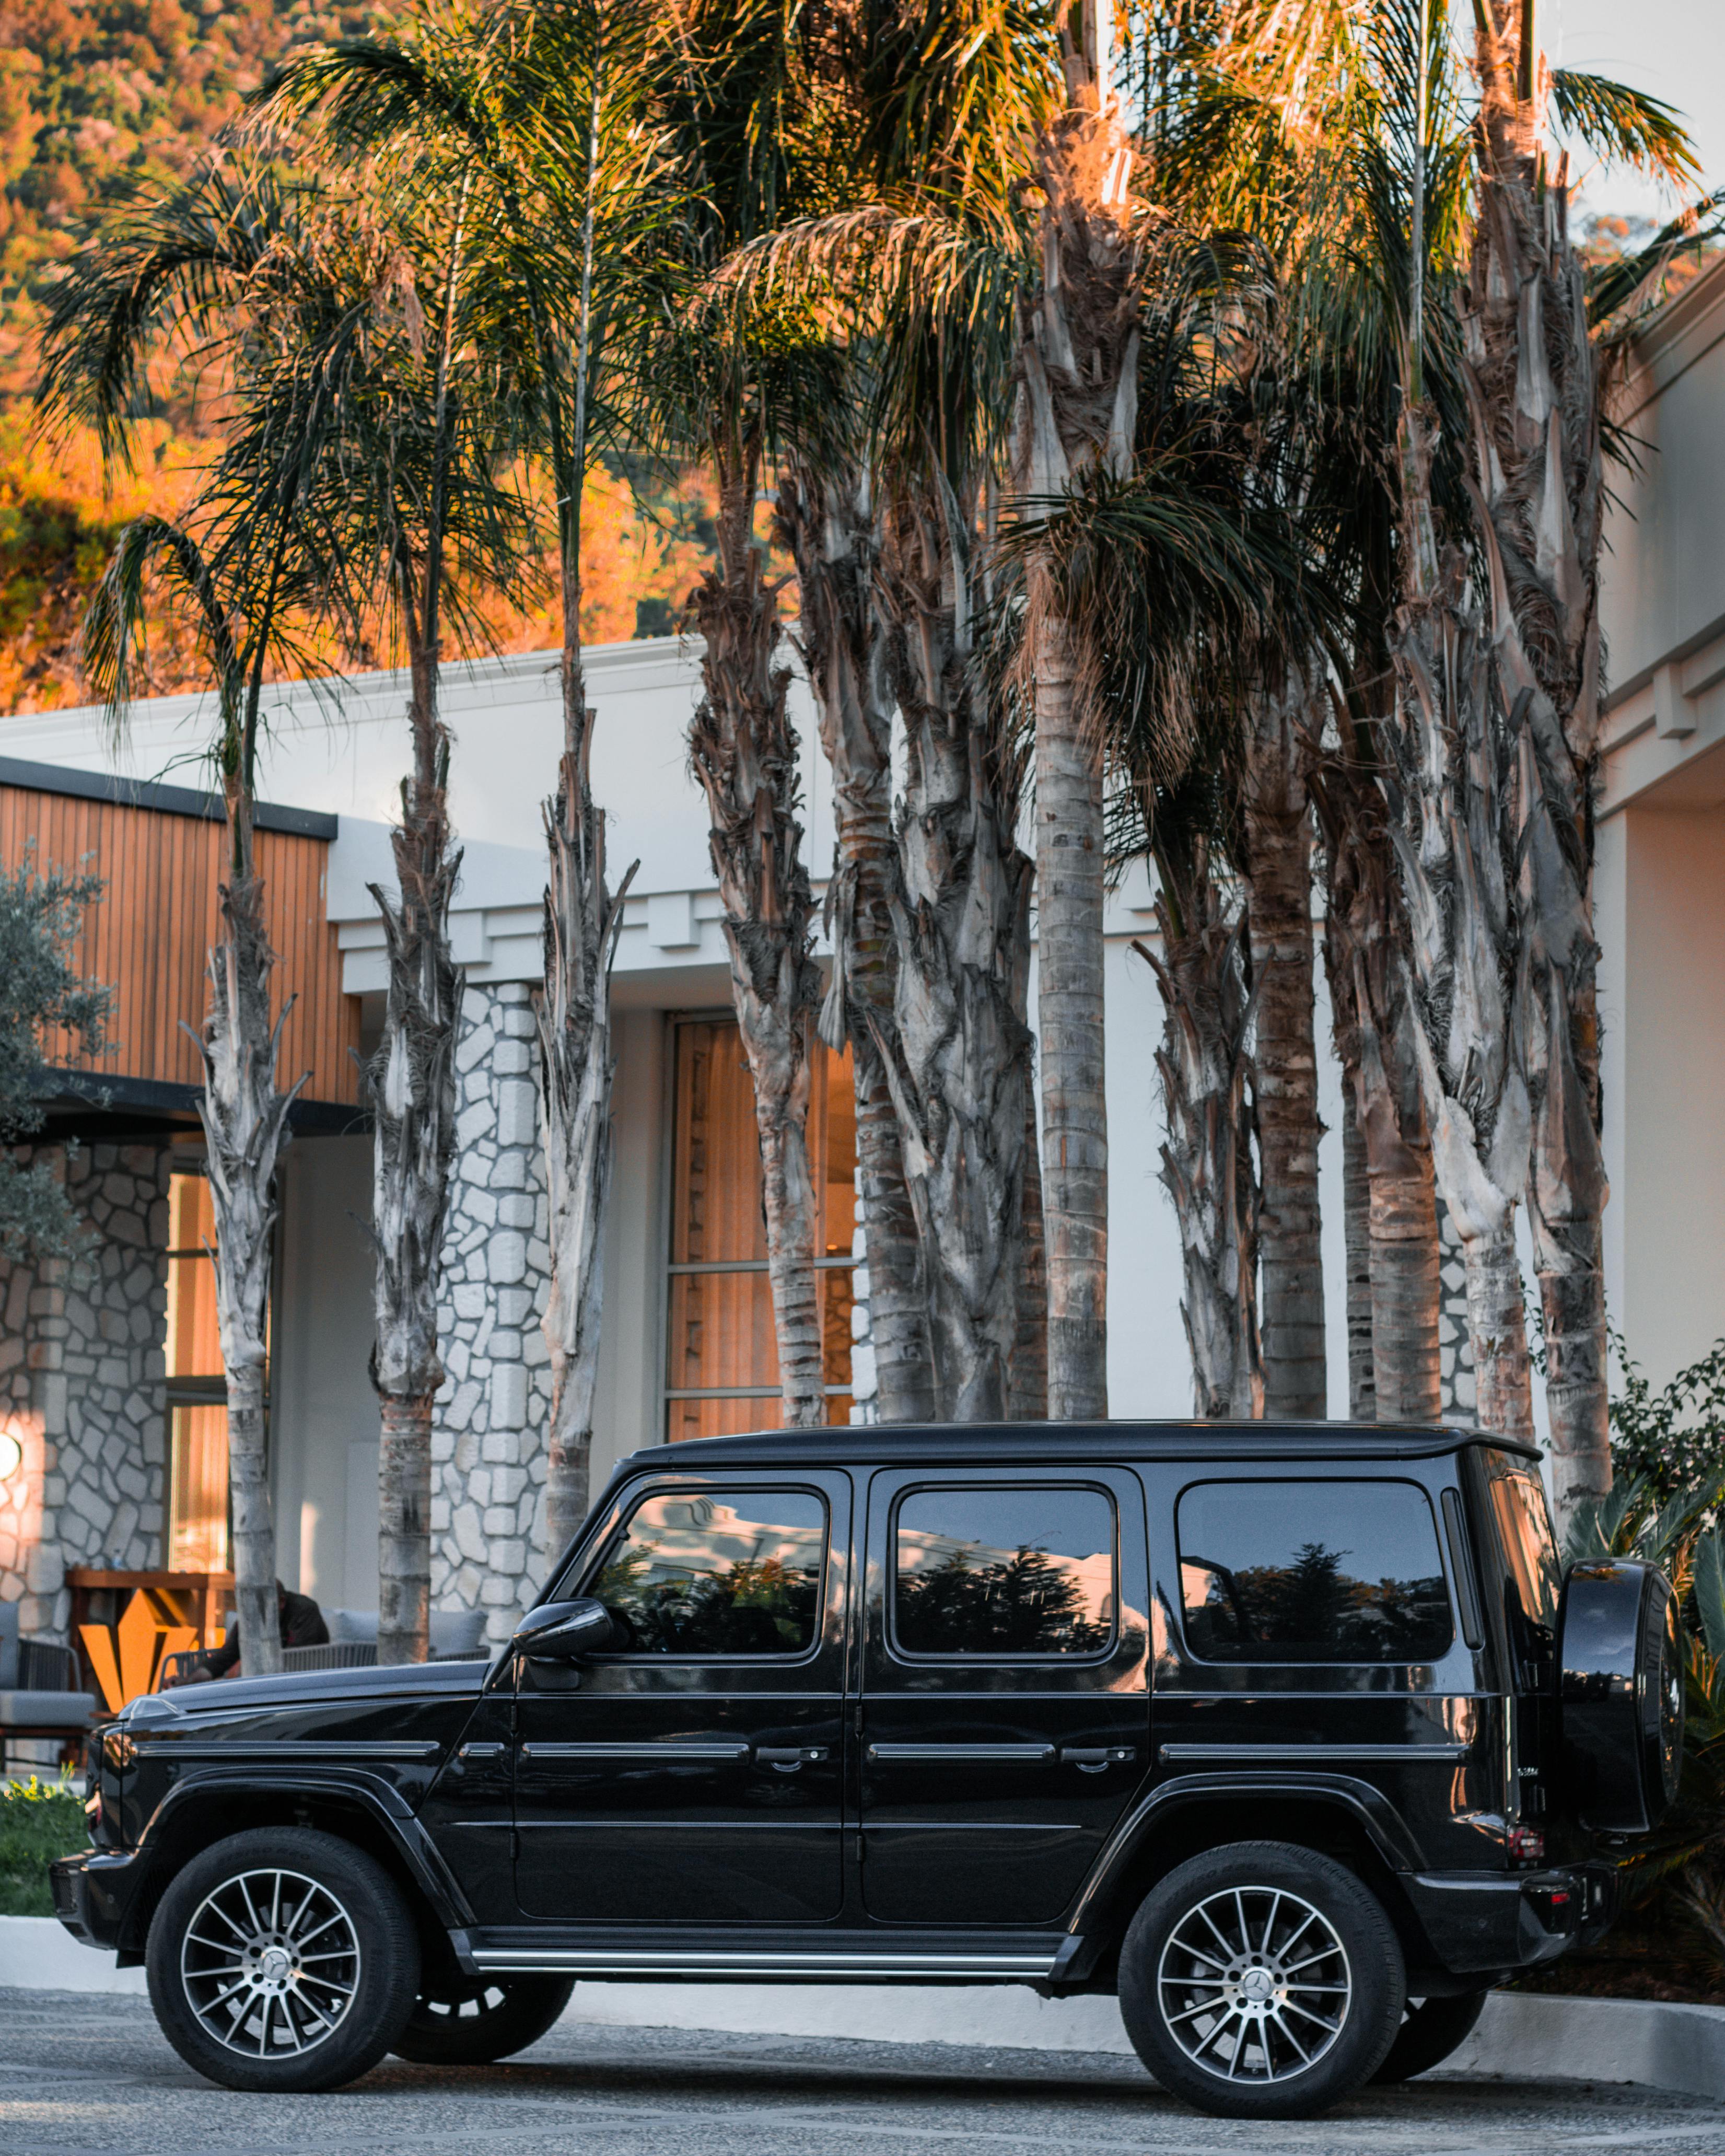 Black SUV Parked Beside the Palm Trees · Free Stock Photo